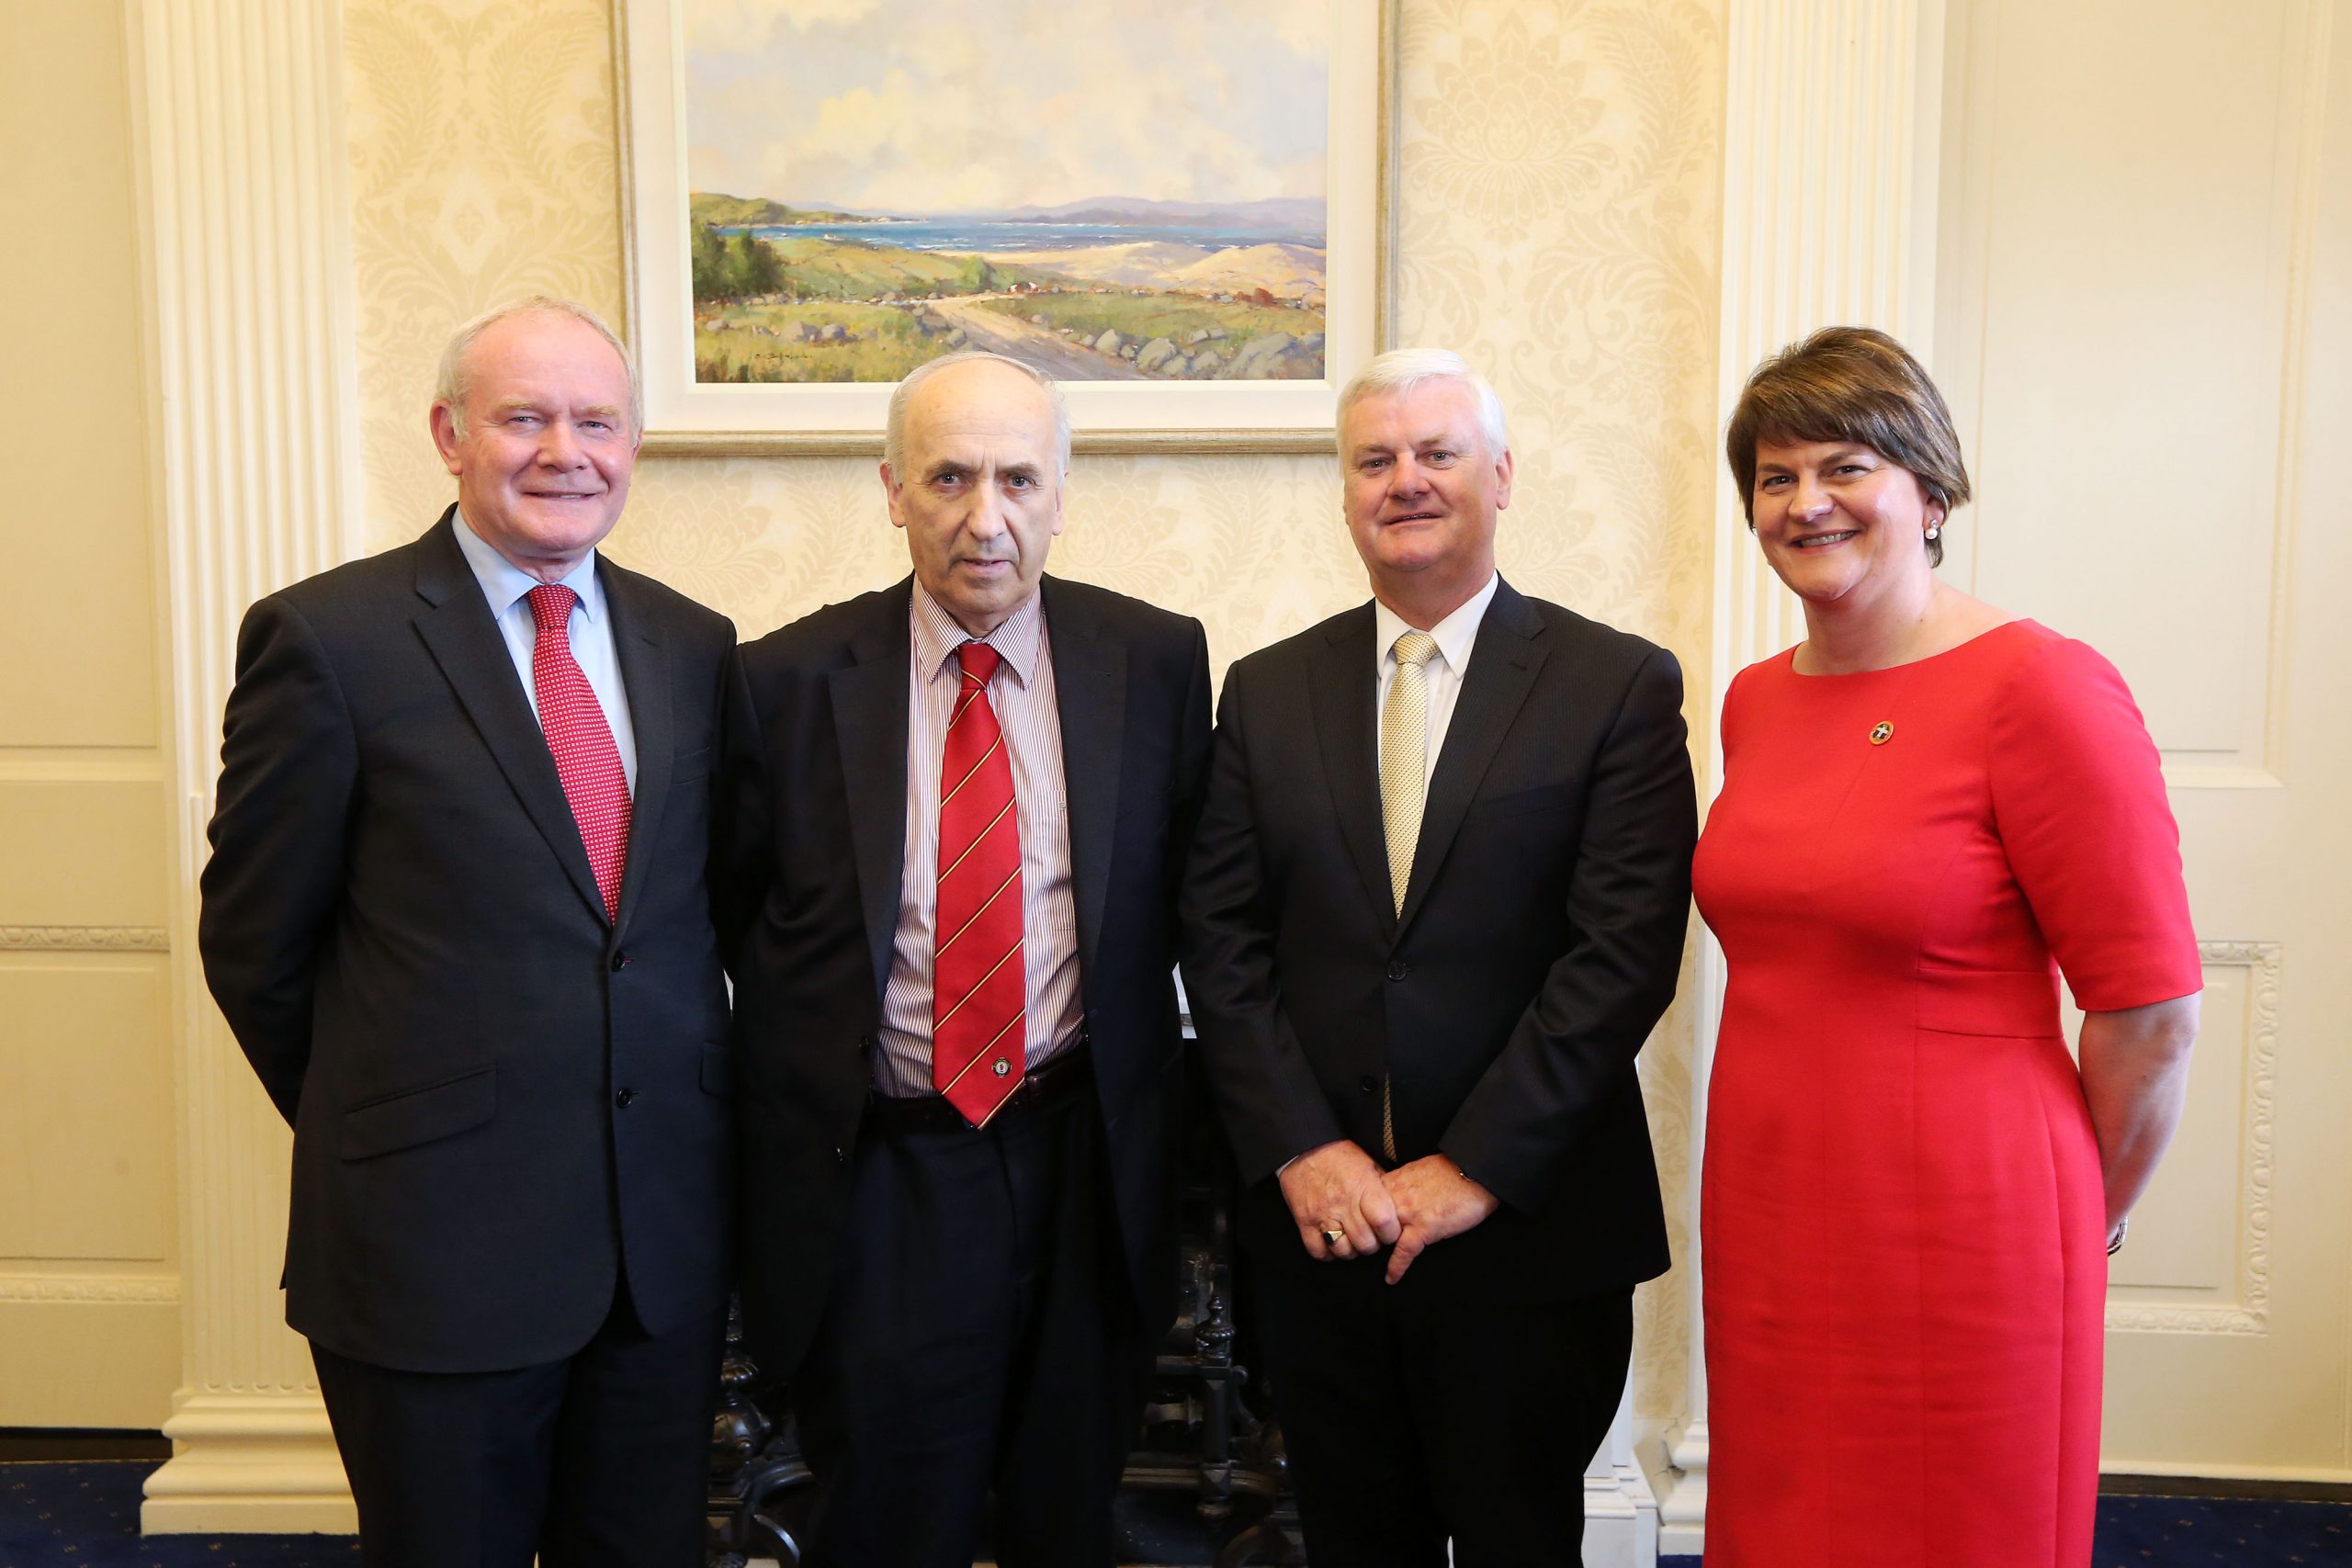 Ulster GAA Secretary honoured by Foster and McGuinness